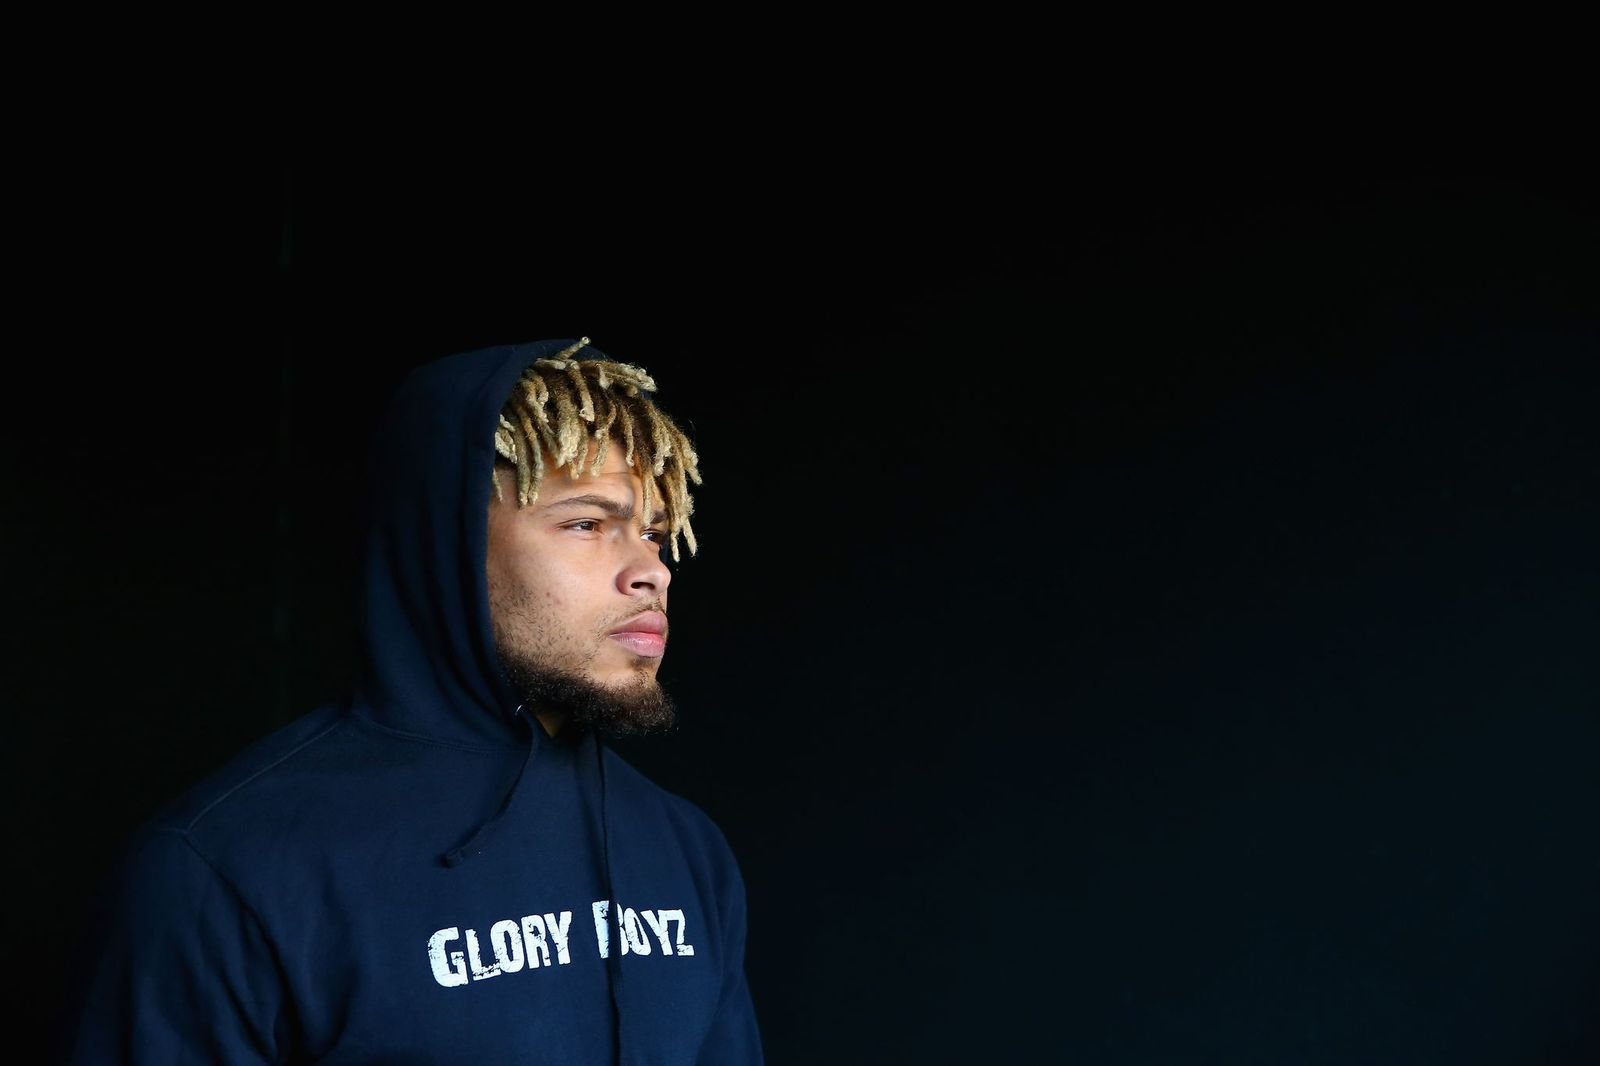 NFL player Tyrann Mathieu at Lincoln Financial Field in December 2018 in Philadelphia | Source: Getty Images